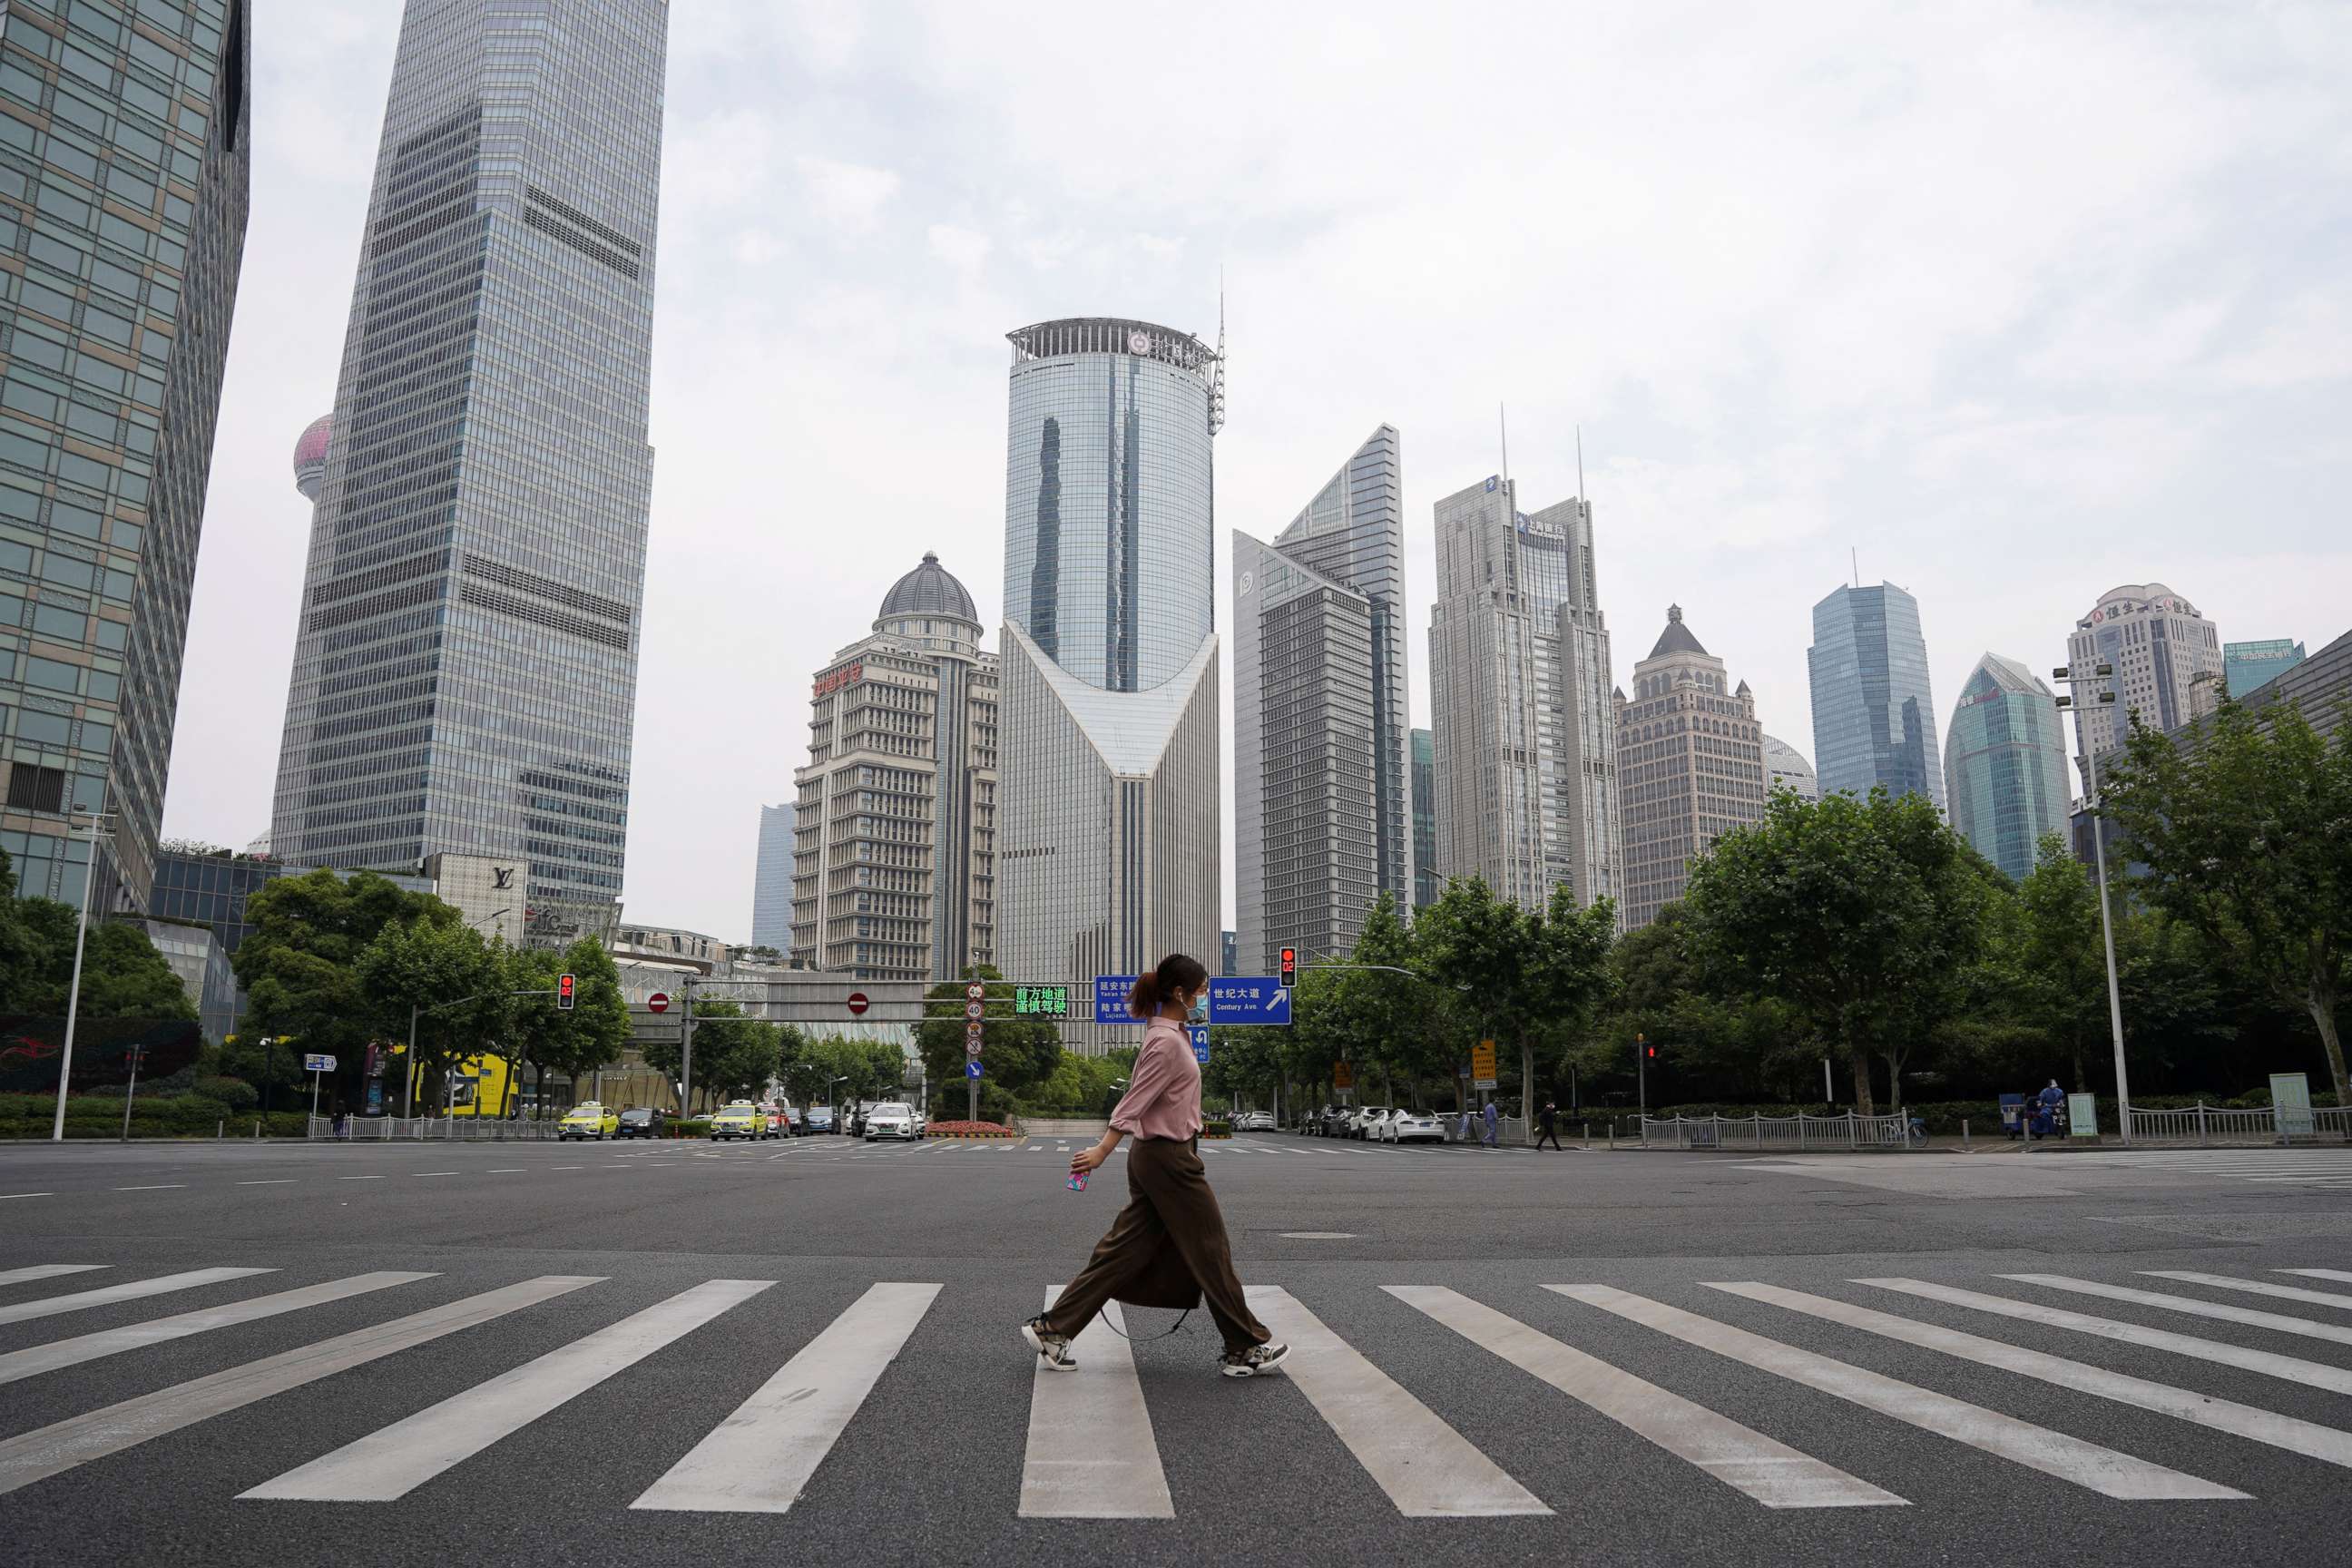 PHOTO: A pedestrian wearing a face mask crosses a road in front of office towers in Lujiazui financial district, after the COVID-19 was lifted in Shanghai, China, June 1, 2022.